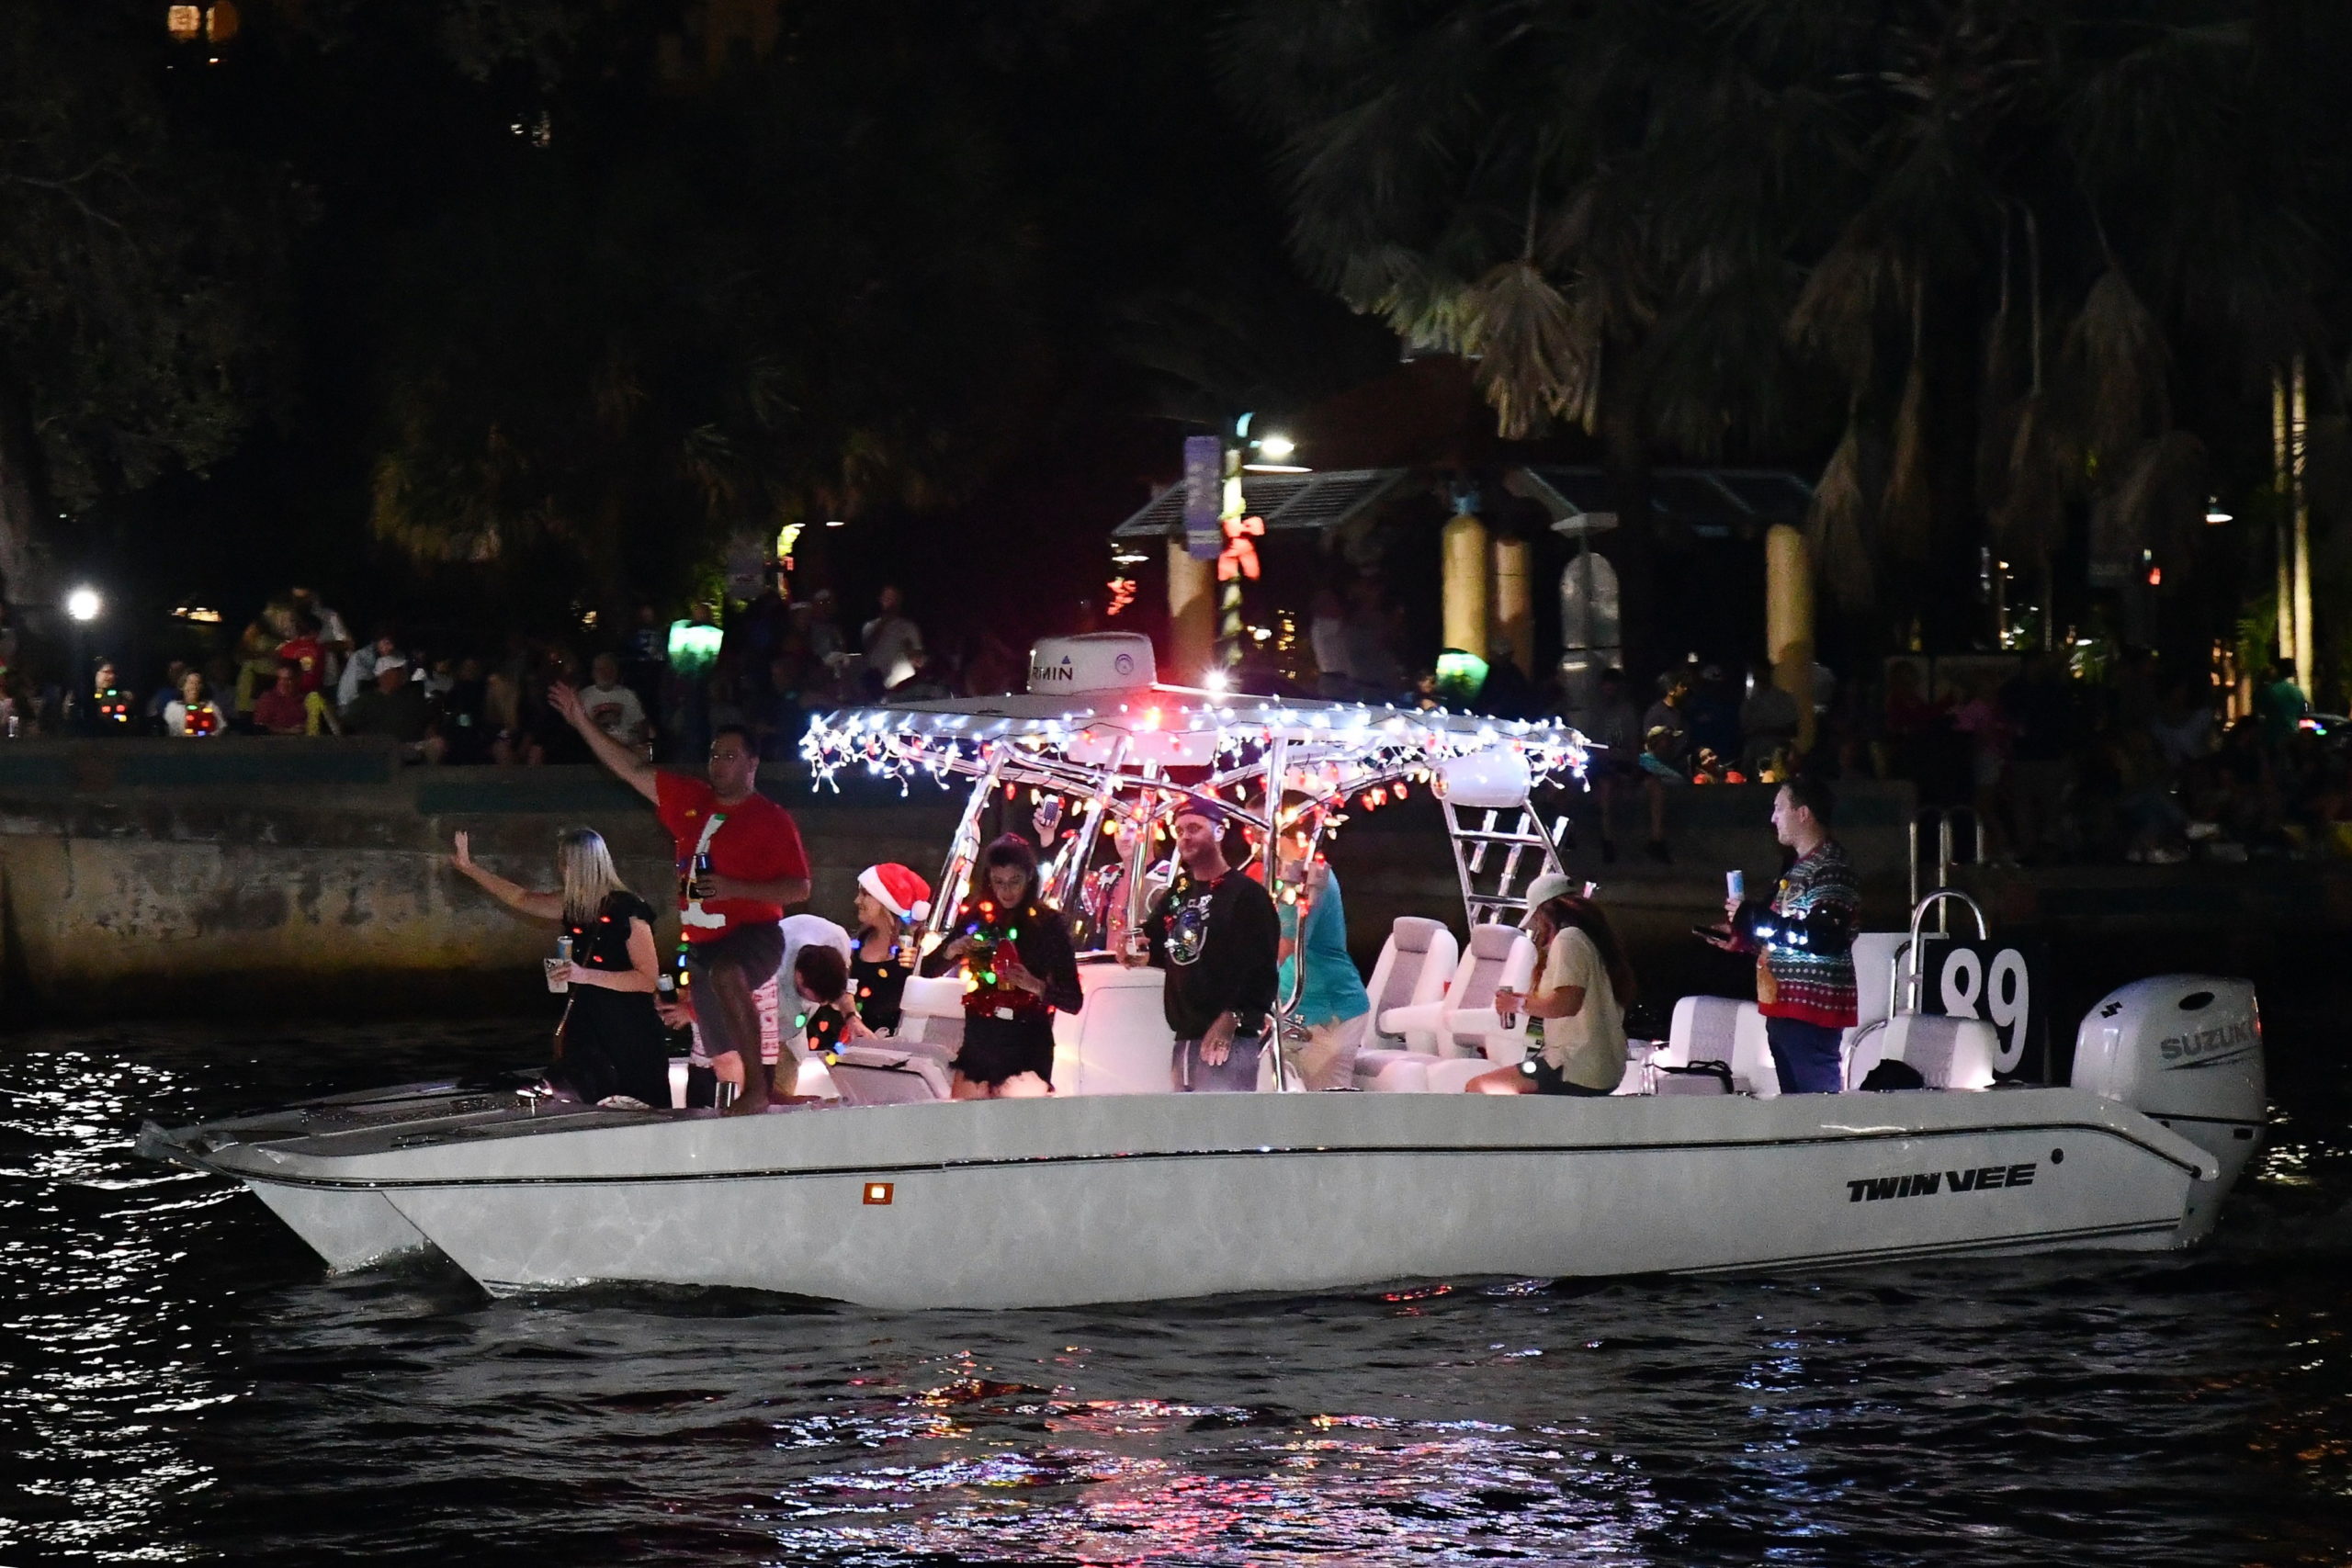 Slip 'N Fall Steve, boat number 89 in the 2022 Winterfest Boat Parade